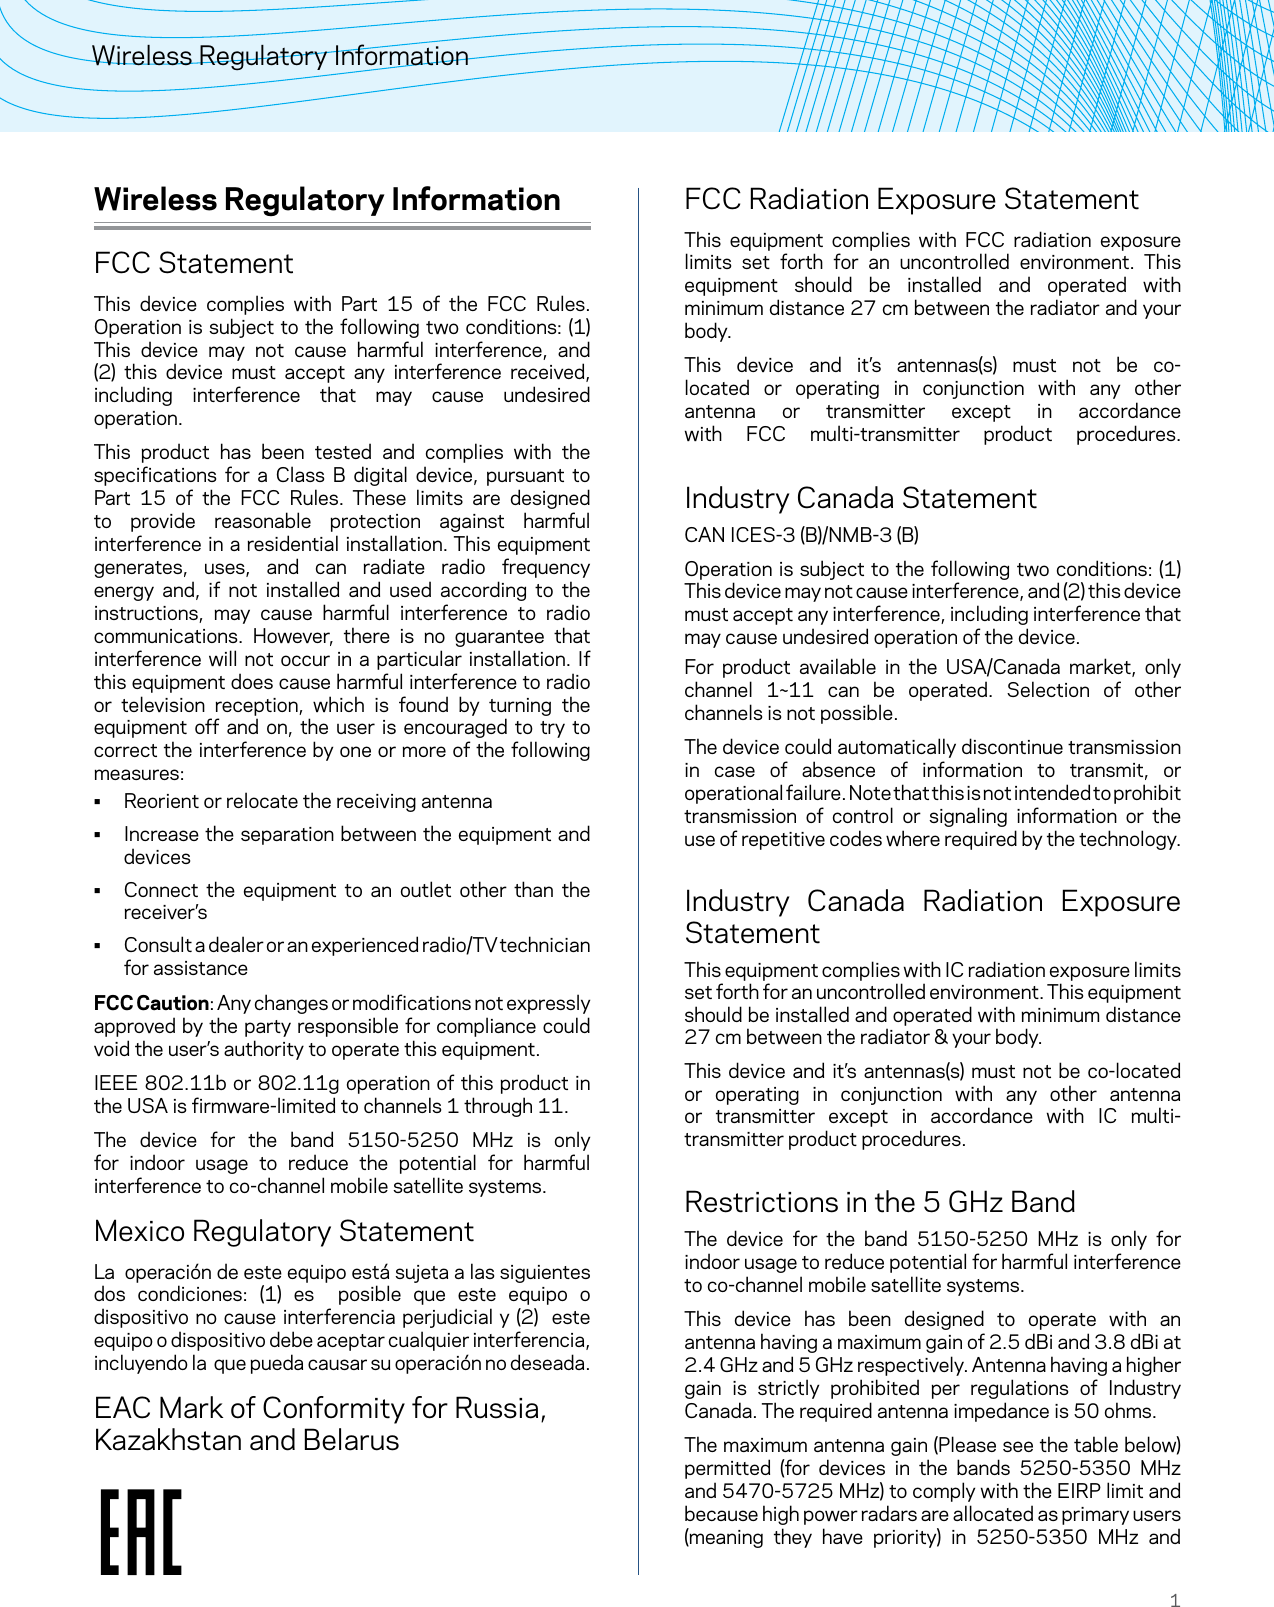 1Wireless Regulatory InformationWireless Regulatory InformationFCC StatementThis device complies with Part 15 of the FCC Rules. Operation is subject to the following two conditions: (1) This device may not cause harmful interference, and (2) this device must accept any interference received, including interference that may cause undesired operation.This product has been tested and complies with the specifications for a Class B digital device, pursuant to Part 15 of the FCC Rules. These limits are designed to provide reasonable protection against harmful interference in a residential installation. This equipment generates, uses, and can radiate radio frequency energy and, if not installed and used according to the instructions, may cause harmful interference to radio communications. However, there is no guarantee that interference will not occur in a particular installation. If this equipment does cause harmful interference to radio or television reception, which is found by turning the equipment off and on, the user is encouraged to try to correct the interference by one or more of the following measures: • Reorient or relocate the receiving antenna • Increase the separation between the equipment and devices • Connect the equipment to an outlet other than the receiver’s • Consult a dealer or an experienced radio/TV technician for assistanceFCC Caution: Any changes or modifications not expressly approved by the party responsible for compliance could void the user’s authority to operate this equipment.IEEE 802.11b or 802.11g operation of this product in the USA is firmware-limited to channels 1 through 11.The device for the band 5150-5250 MHz is only for indoor usage to reduce the potential for harmful interference to co-channel mobile satellite systems.Mexico Regulatory StatementLa  operación de este equipo está sujeta a las siguientes dos condiciones: (1) es  posible que este equipo o dispositivo no cause interferencia perjudicial y (2)  este equipo o dispositivo debe aceptar cualquier interferencia, incluyendo la  que pueda causar su operación no deseada.EAC Mark of Conformity for Russia, Kazakhstan and BelarusFCC Radiation Exposure StatementThis equipment complies with FCC radiation exposure limits set forth for an uncontrolled environment. This equipment should be installed and operated with minimum distance 27 cm between the radiator and your body.This device and it’s antennas(s) must not be co-located or operating in conjunction with any other antenna or transmitter except in accordance with FCC multi-transmitter product procedures.  Industry Canada StatementCAN ICES-3 (B)/NMB-3 (B)Operation is subject to the following two conditions: (1) This device may not cause interference, and (2) this device must accept any interference, including interference that may cause undesired operation of the device.For product available in the USA/Canada market, only channel 1~11 can be operated. Selection of other channels is not possible.The device could automatically discontinue transmission in case of absence of information to transmit, or operational failure. Note that this is not intended to prohibit transmission of control or signaling information or the use of repetitive codes where required by the technology.  Industry Canada Radiation Exposure StatementThis equipment complies with IC radiation exposure limits set forth for an uncontrolled environment. This equipment should be installed and operated with minimum distance 27 cm between the radiator &amp; your body.This device and it’s antennas(s) must not be co-located or operating in conjunction with any other antenna or transmitter except in accordance with IC multi-transmitter product procedures. Restrictions in the 5 GHz BandThe device for the band 5150-5250 MHz is only for indoor usage to reduce potential for harmful interference to co-channel mobile satellite systems.This device has been designed to operate with an antenna having a maximum gain of 2.5 dBi and 3.8 dBi at  2.4 GHz and 5 GHz respectively. Antenna having a higher gain is strictly prohibited per regulations of Industry Canada. The required antenna impedance is 50 ohms.The maximum antenna gain (Please see the table below) permitted (for devices in the bands 5250-5350 MHz and 5470-5725 MHz) to comply with the EIRP limit and because high power radars are allocated as primary users (meaning they have priority) in 5250-5350 MHz and 